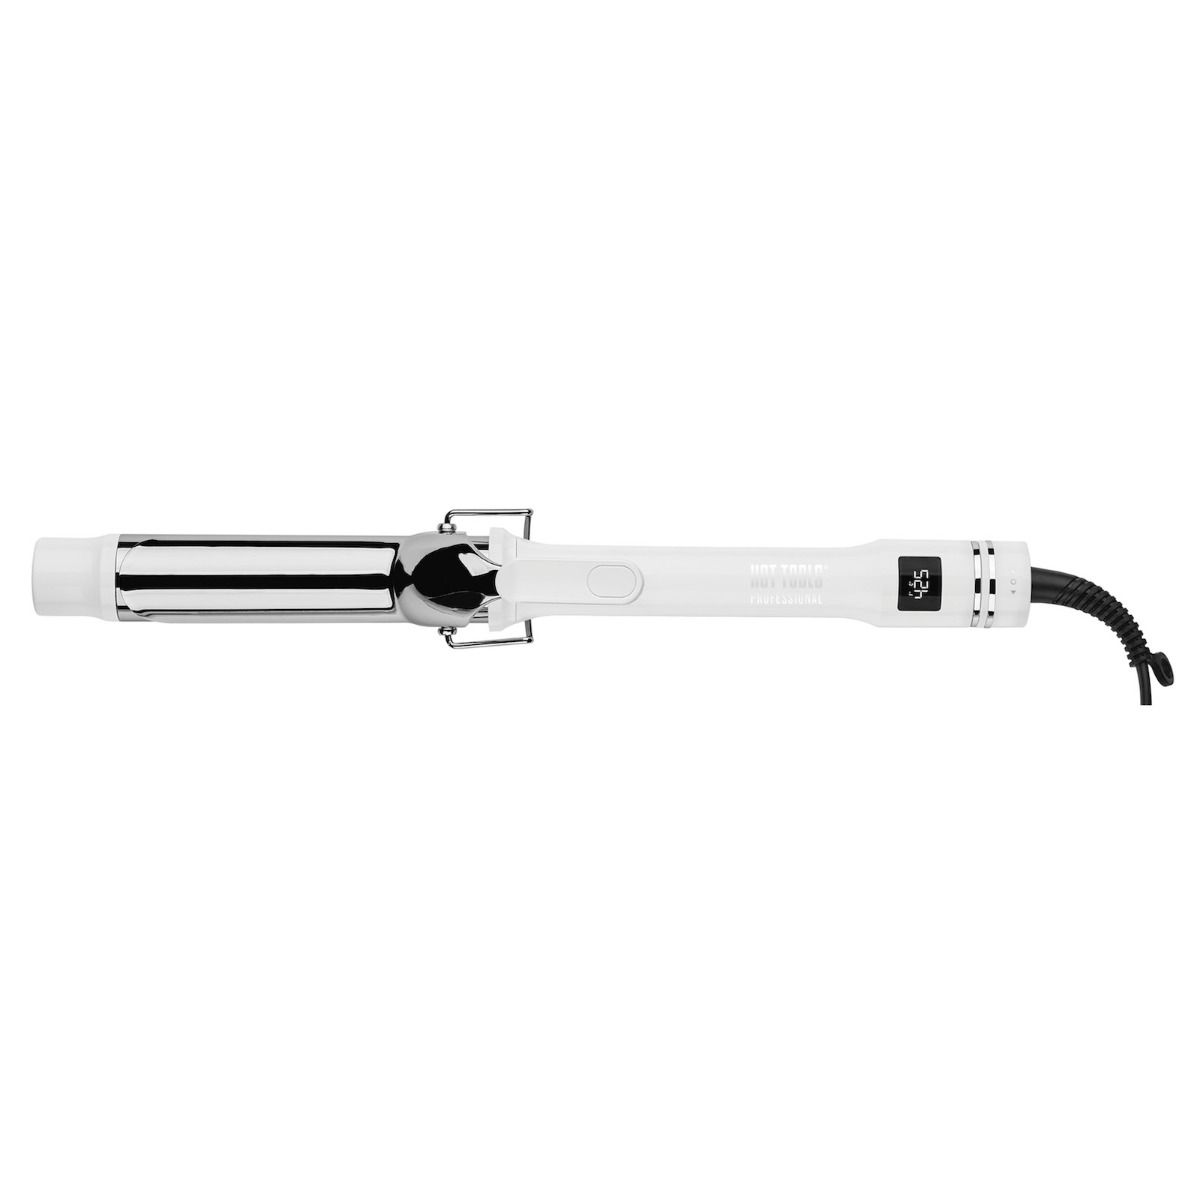 Hot Tools White Gold Collection Digital Curling Iron -1 1/4 INCH